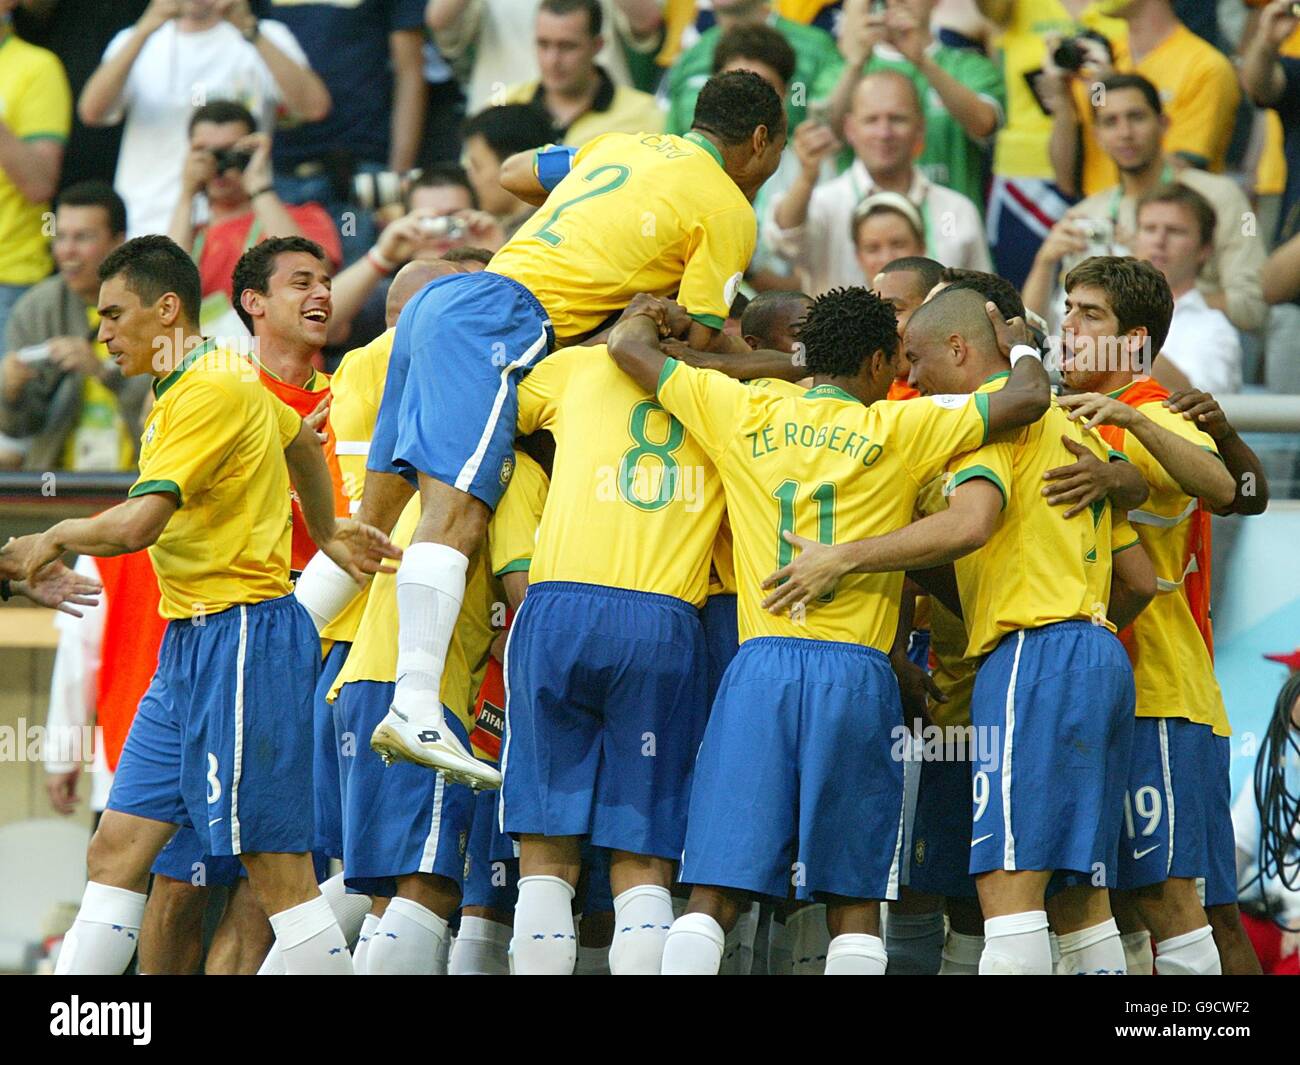 Brazil's Adriano celebrates scoring the opening goal of the game with his team mates Stock Photo